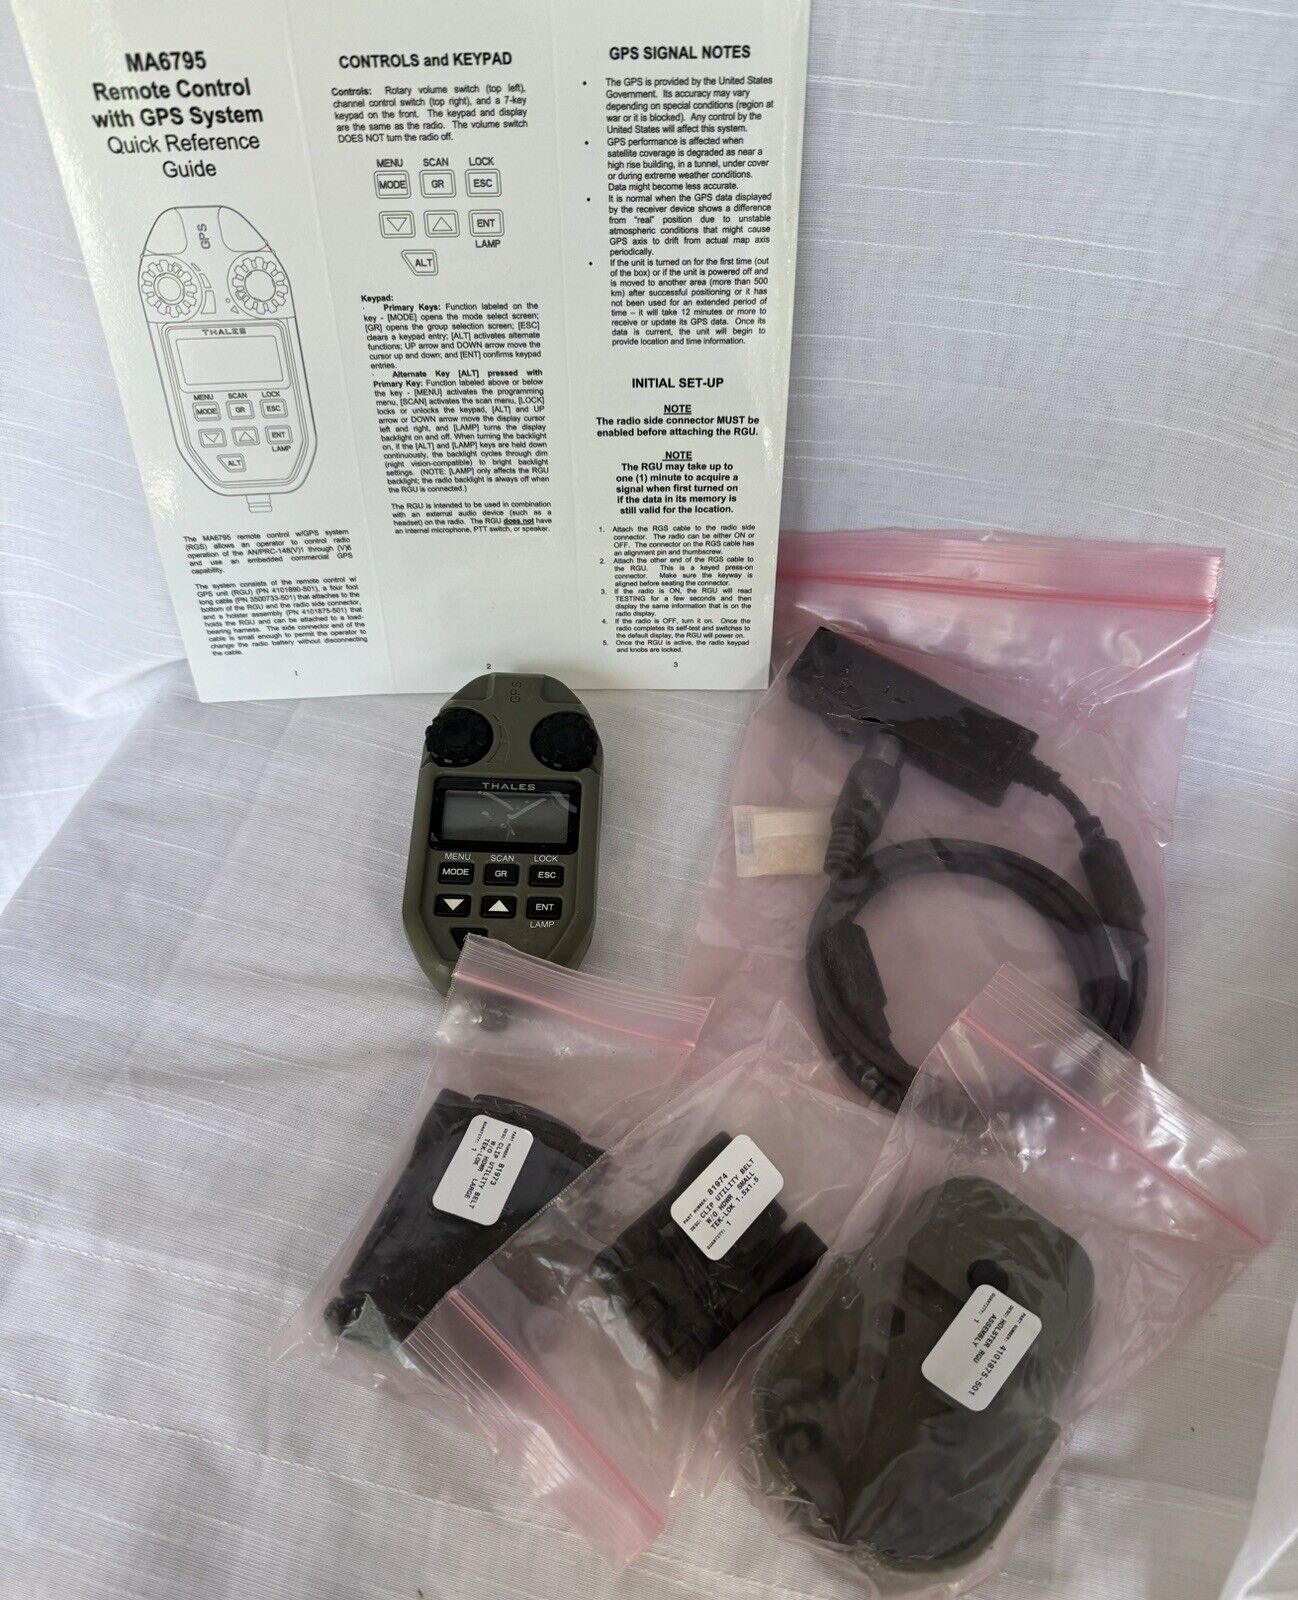 Thales MA6795 remote control with GPS system, Cable, Holster, Belt Clip, Guide